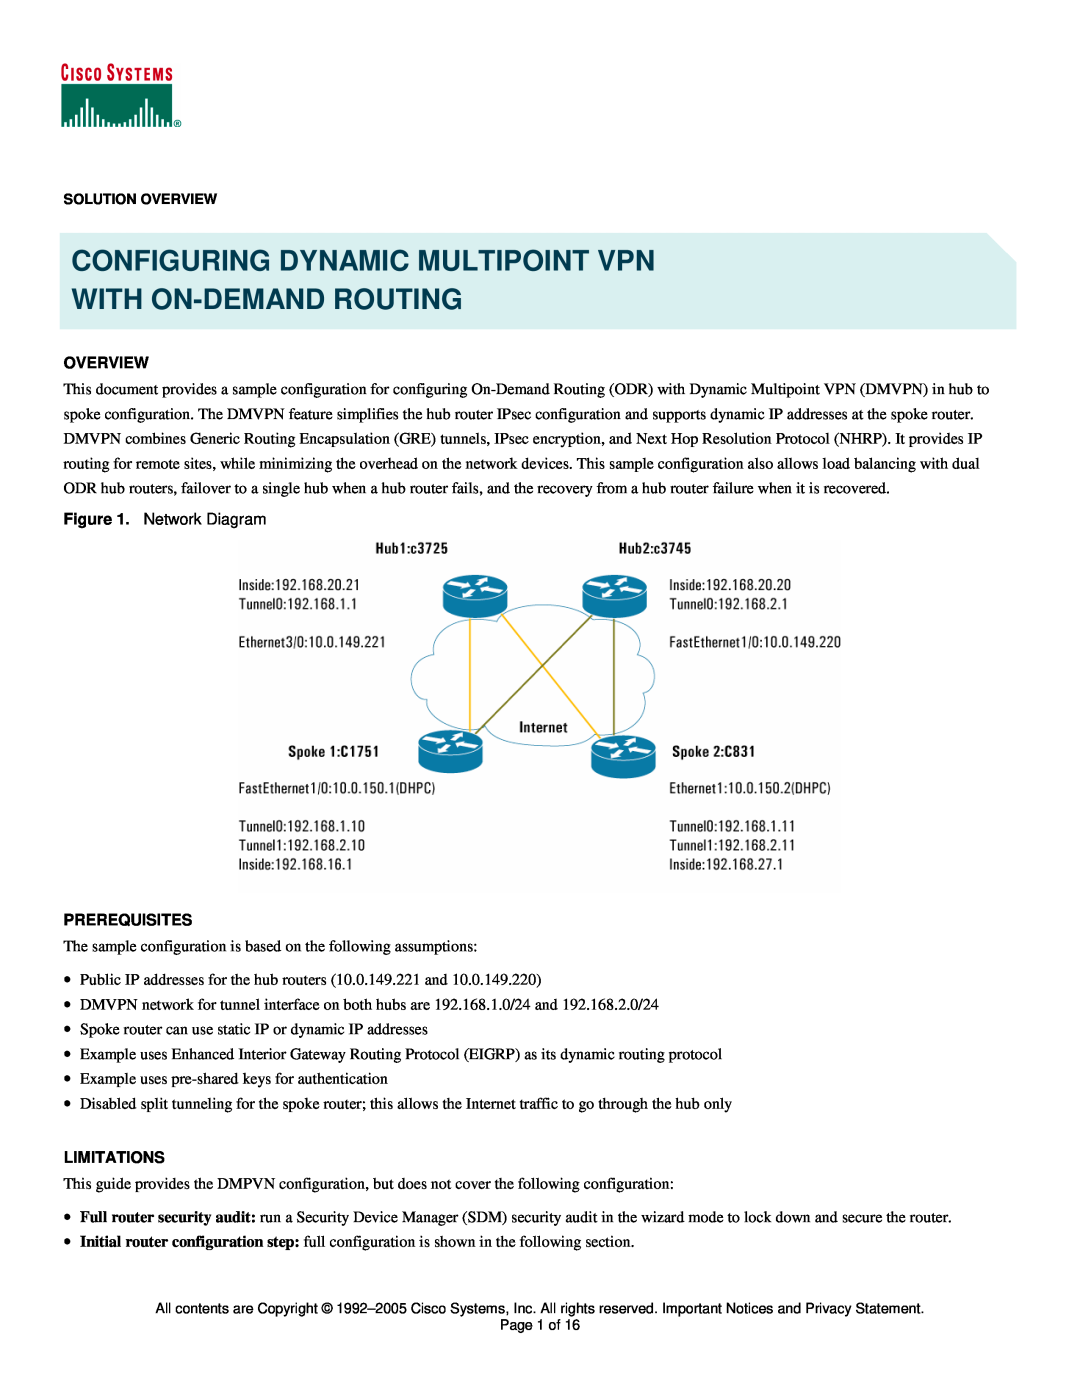 Cisco Systems 3725 manual Overview, Prerequisites, Limitations, Configuring Dynamic Multipoint Vpn With On-Demand Routing 